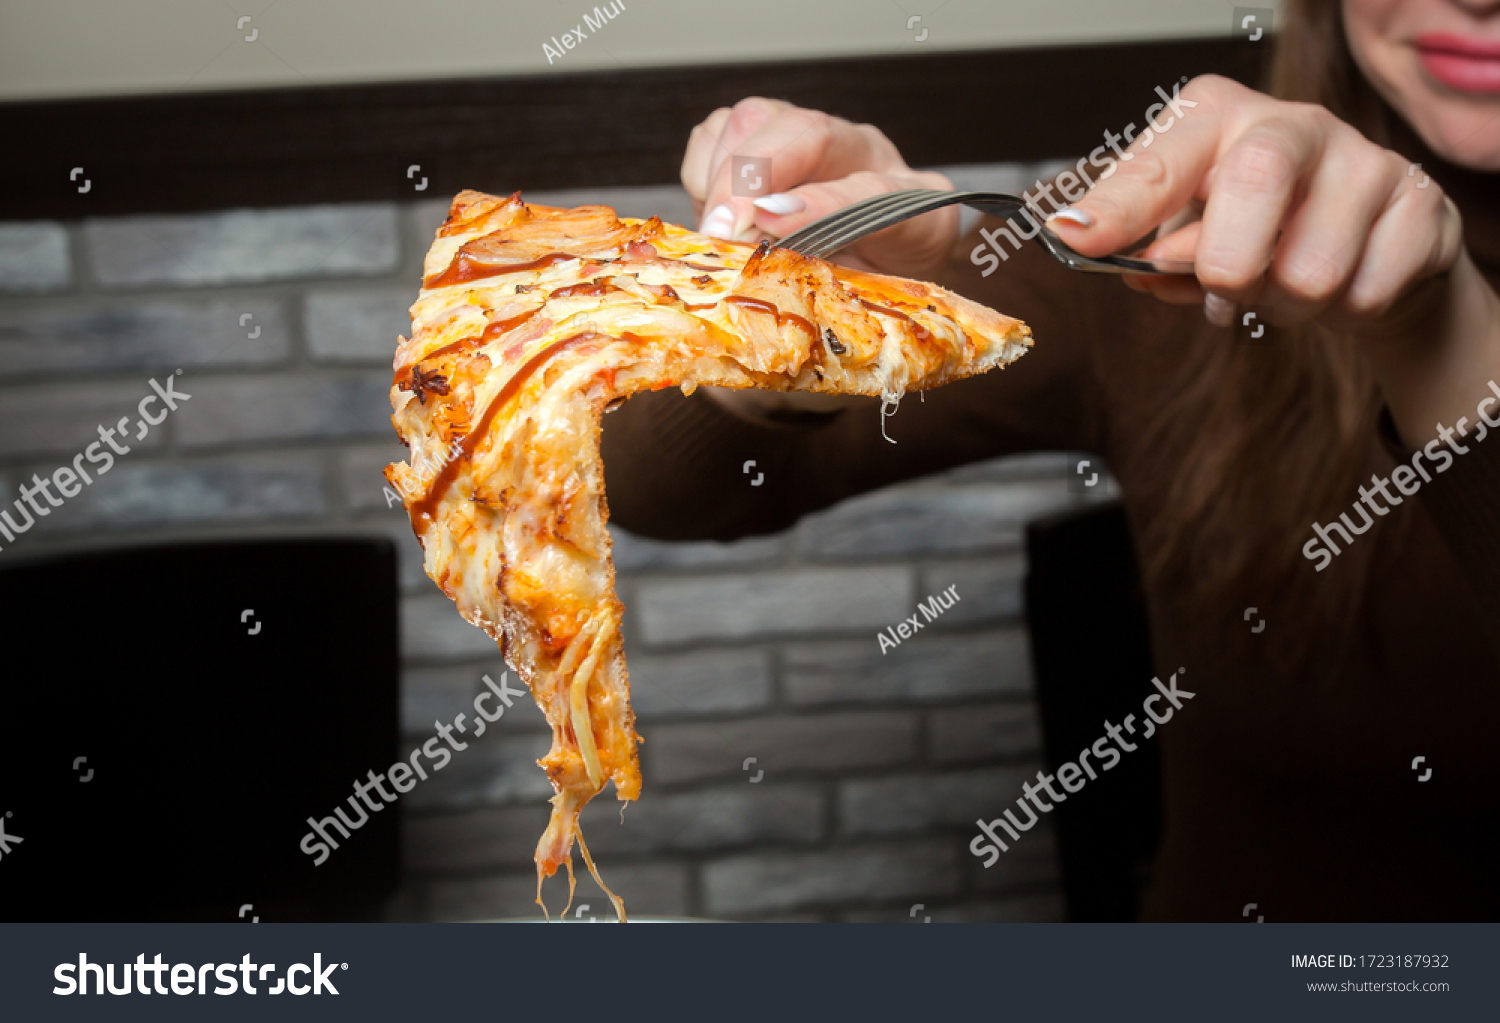 The girl takes a slice of pizza with a fork and knife #1723187932